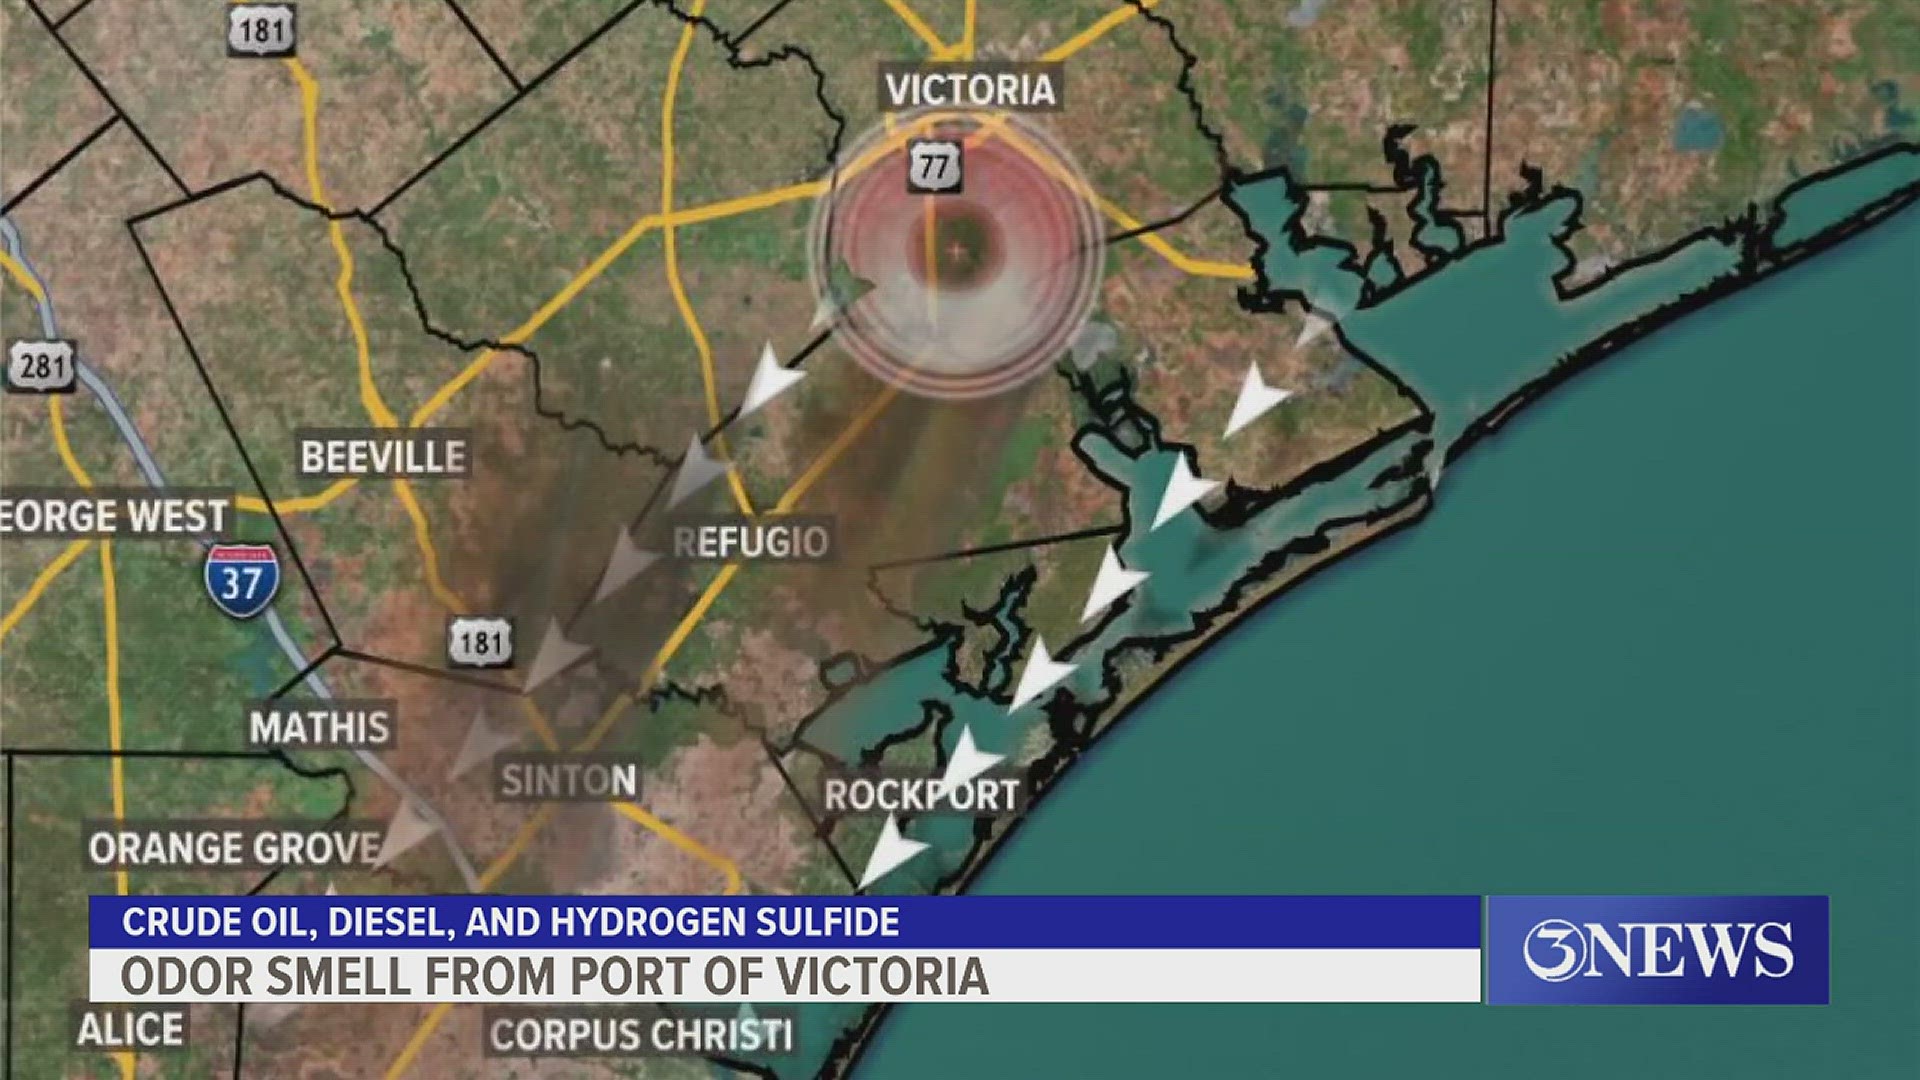 A press release from the Port of Victoria stated that the spill has not entered the Victoria Barge Canal.